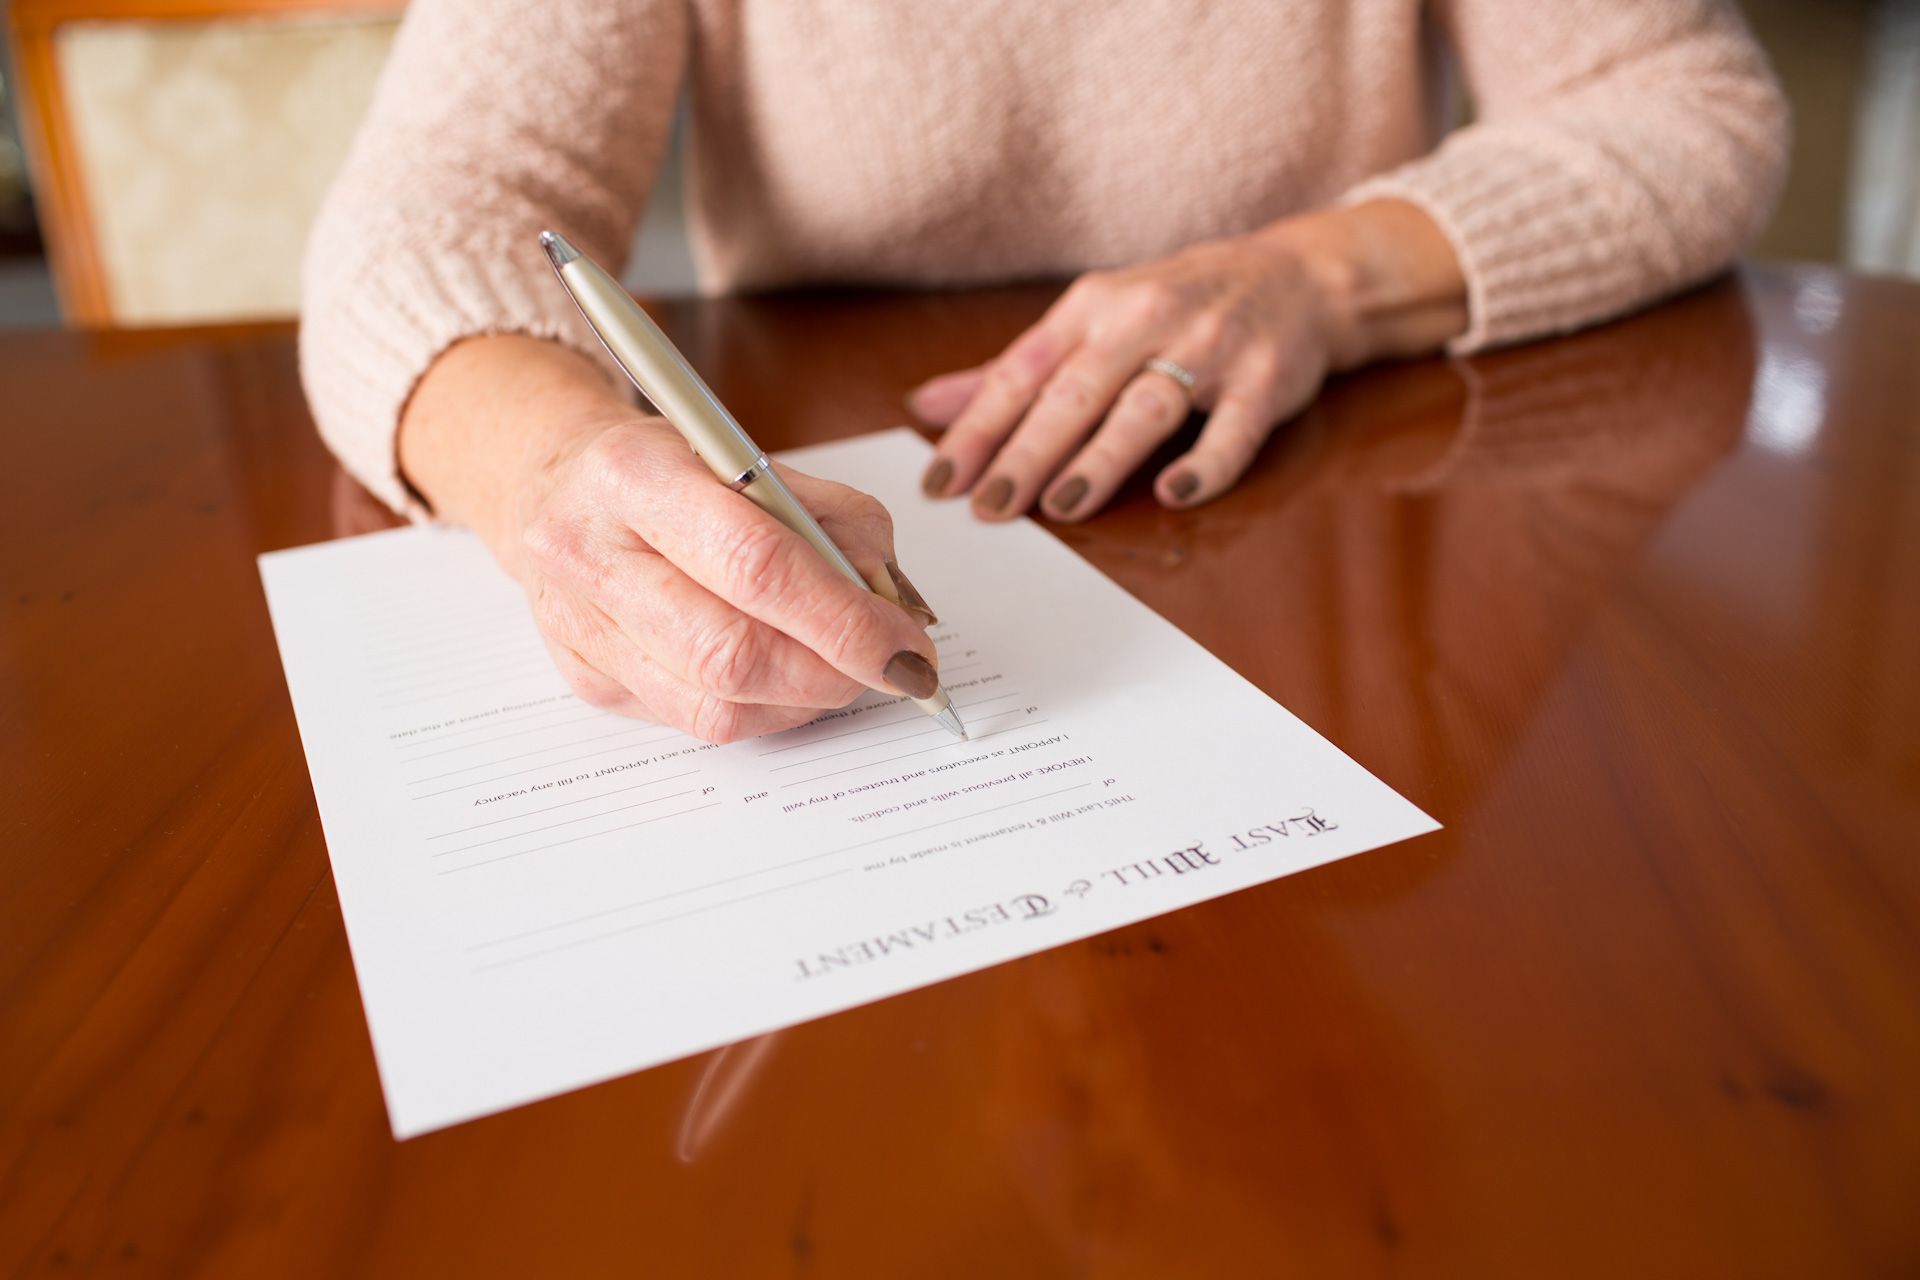 A woman is sitting at a table writing on a piece of paper with a pen